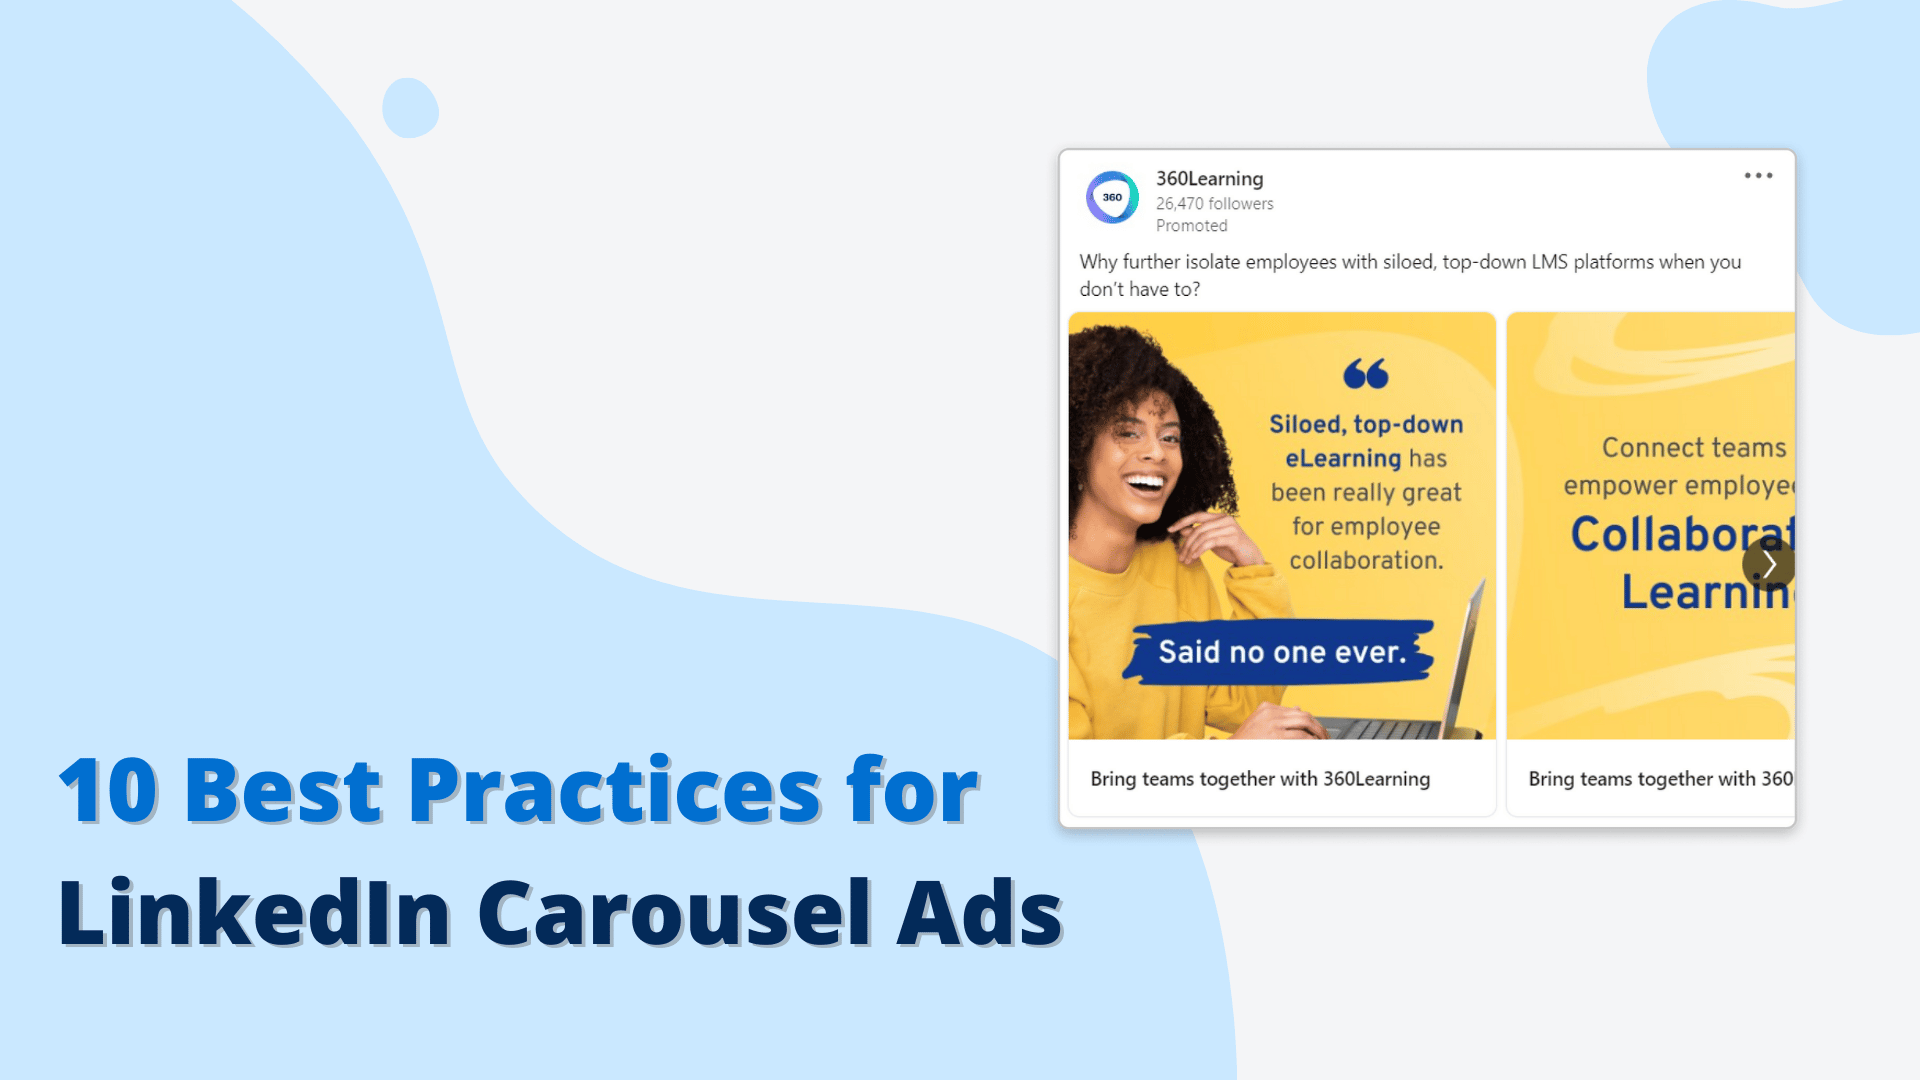 10 Best Practices for LinkedIn Carousel Ads